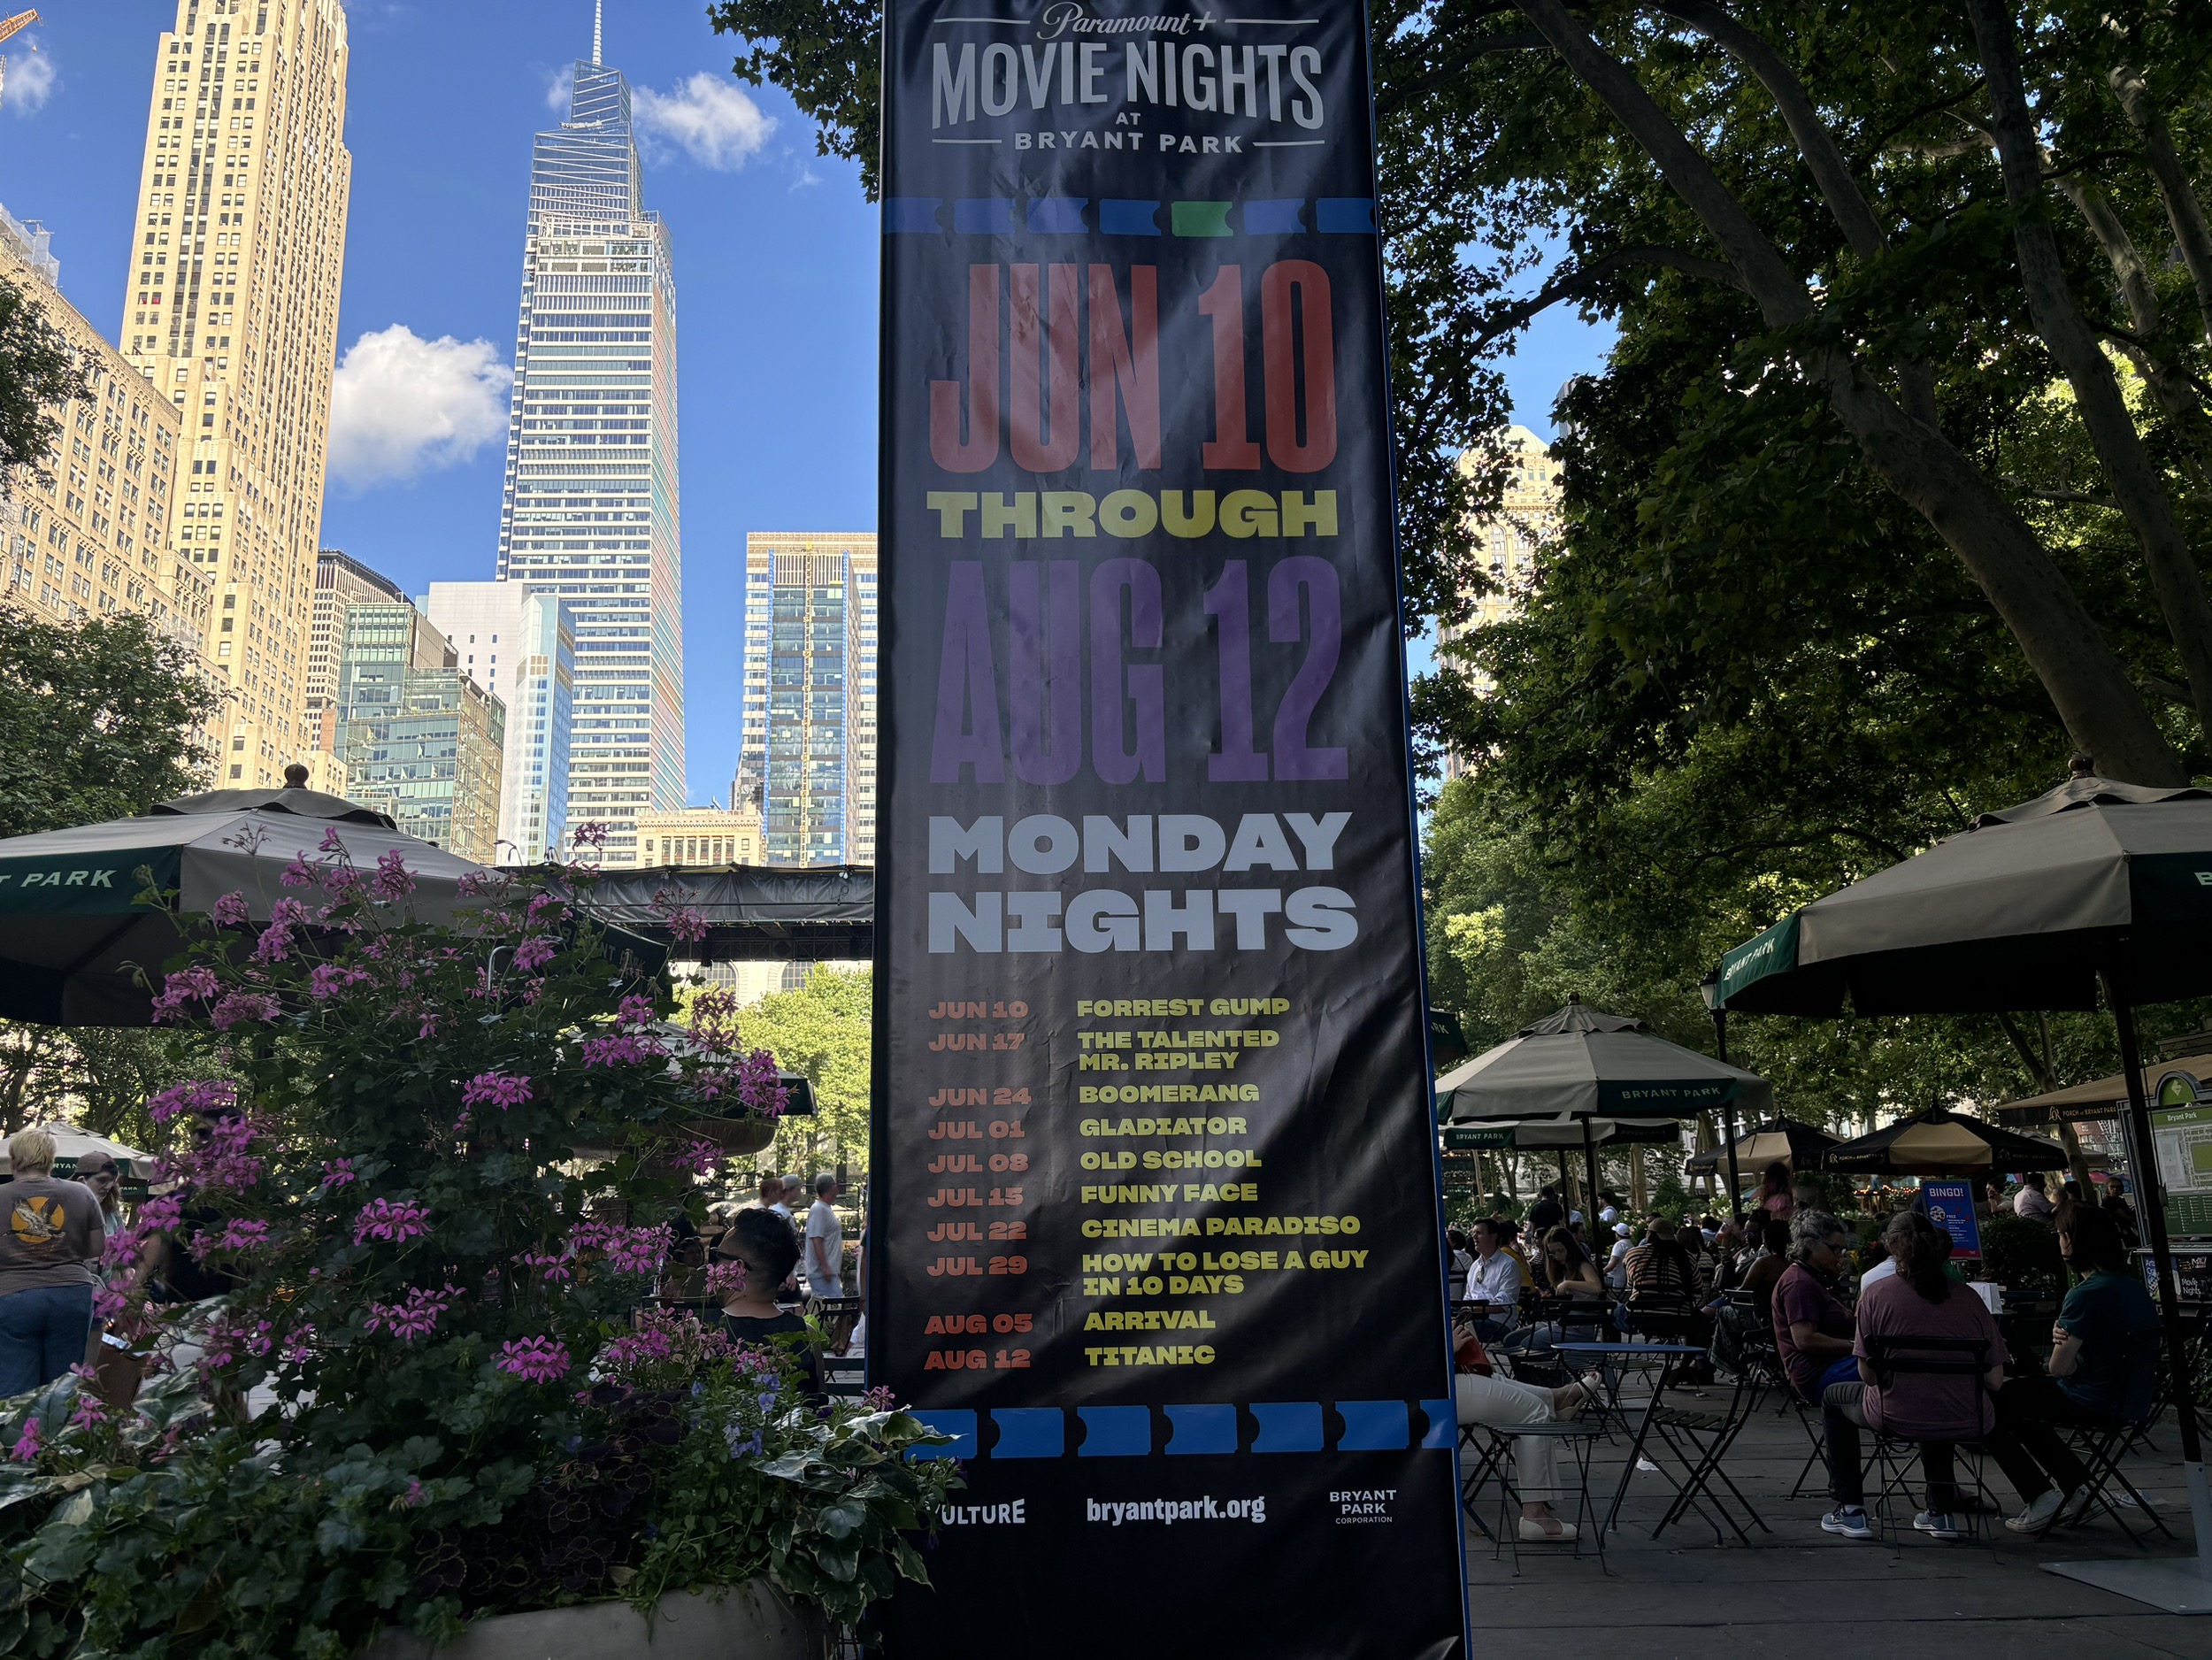 A picture of a poster for Movie Nights at Bryant Park. The lineup includes Forrest Gump, The Talented Mr. Ripley, Boomerang, Gladiator, Old School, Funny Face, Cinema Paradiso, How to Lose a Guy in 10 Days, Arrival, and Titanic